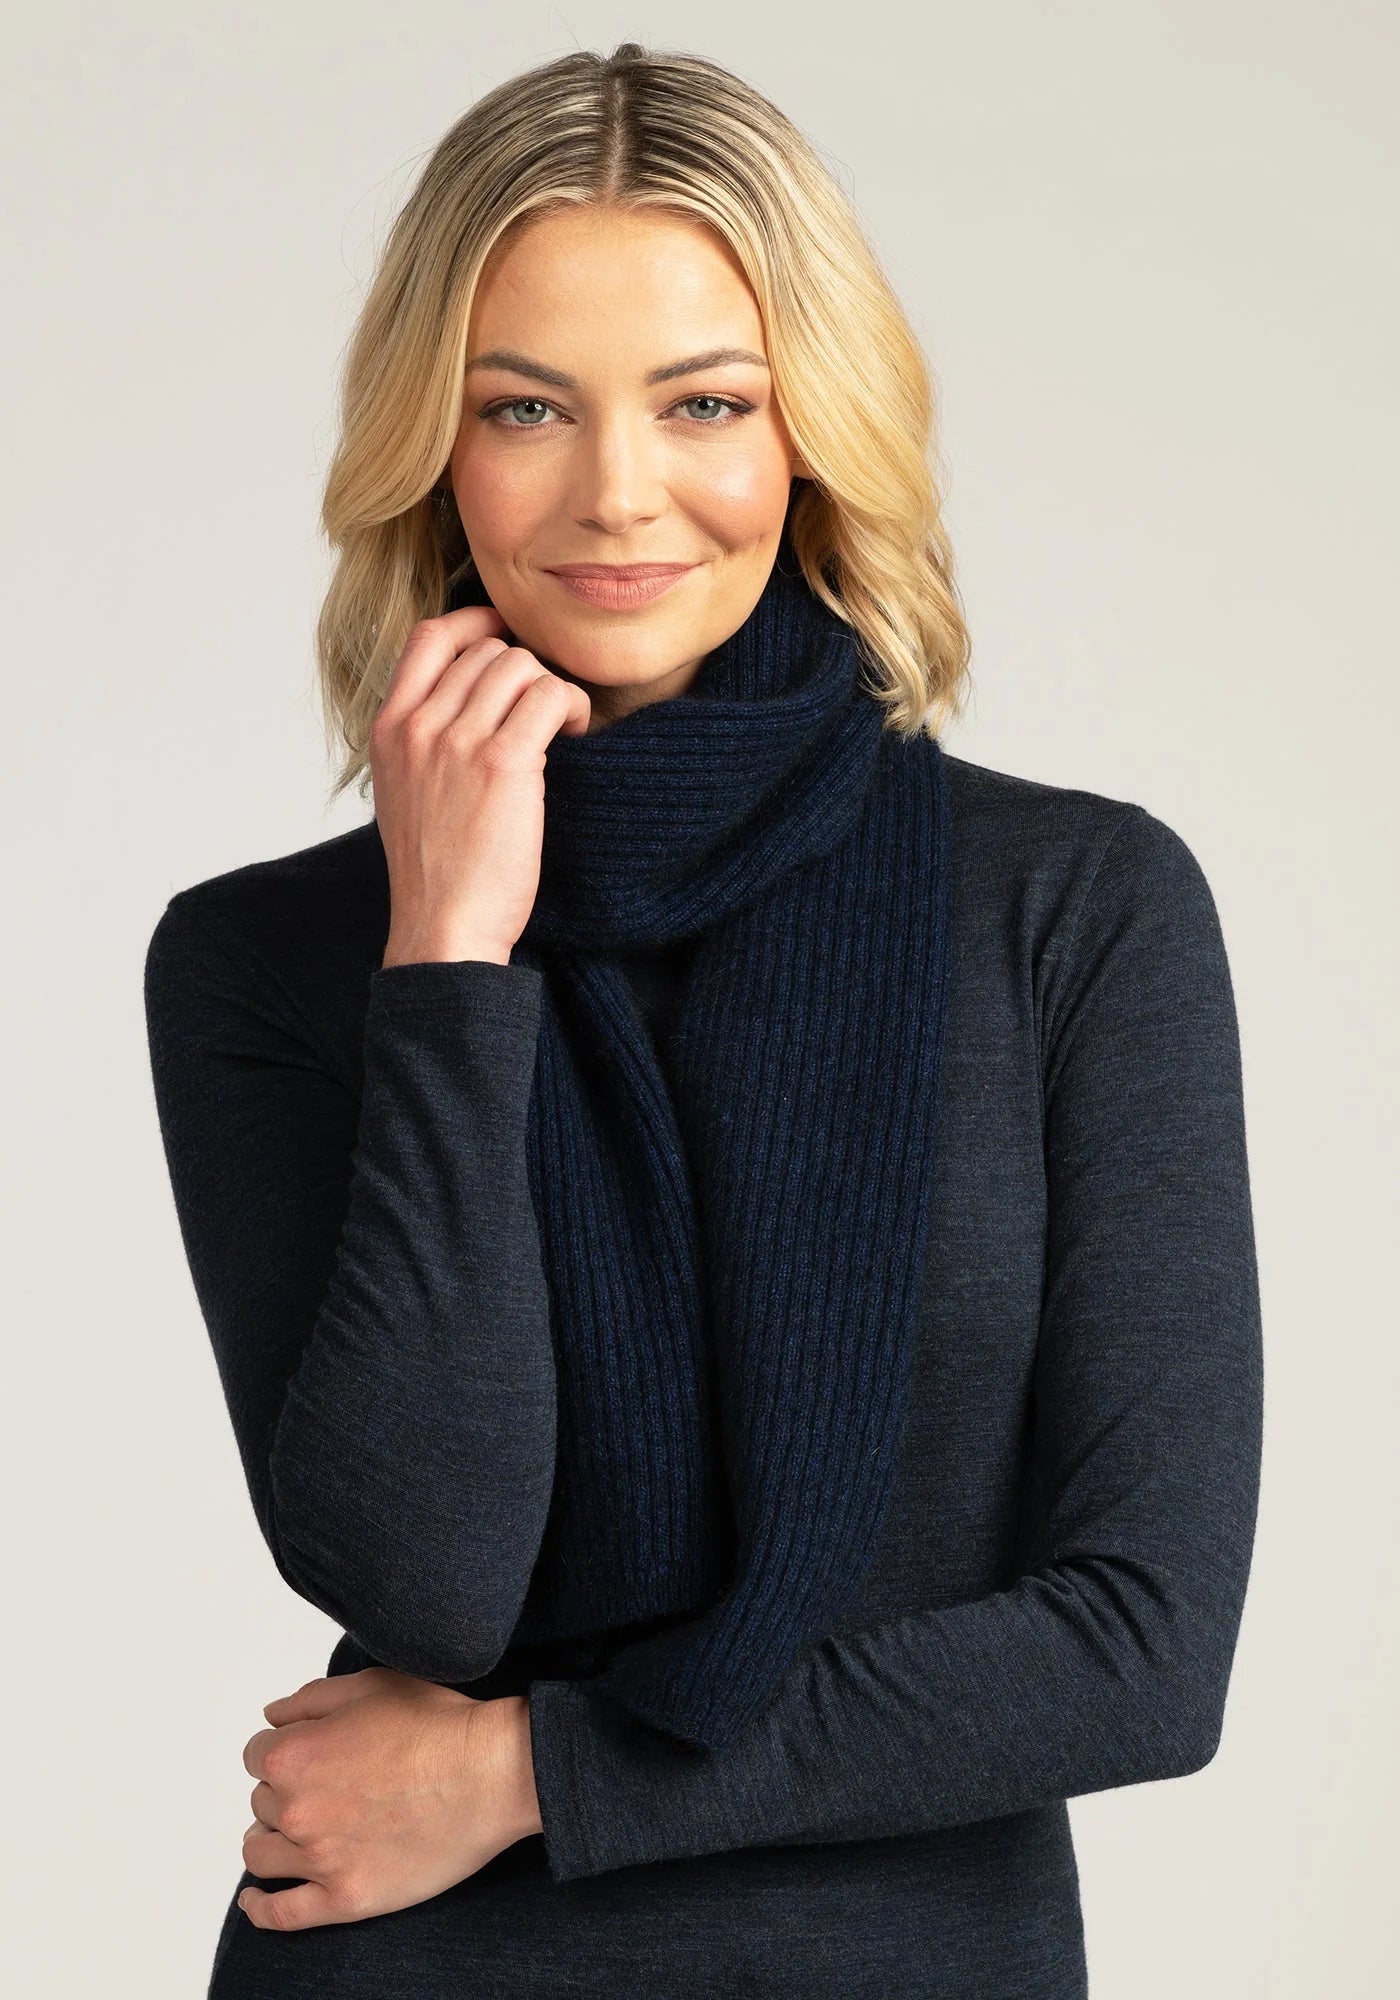 Complete your look with our blue merino wool ribbed scarf. Effortlessly stylish and irresistibly cozy. Buy now!